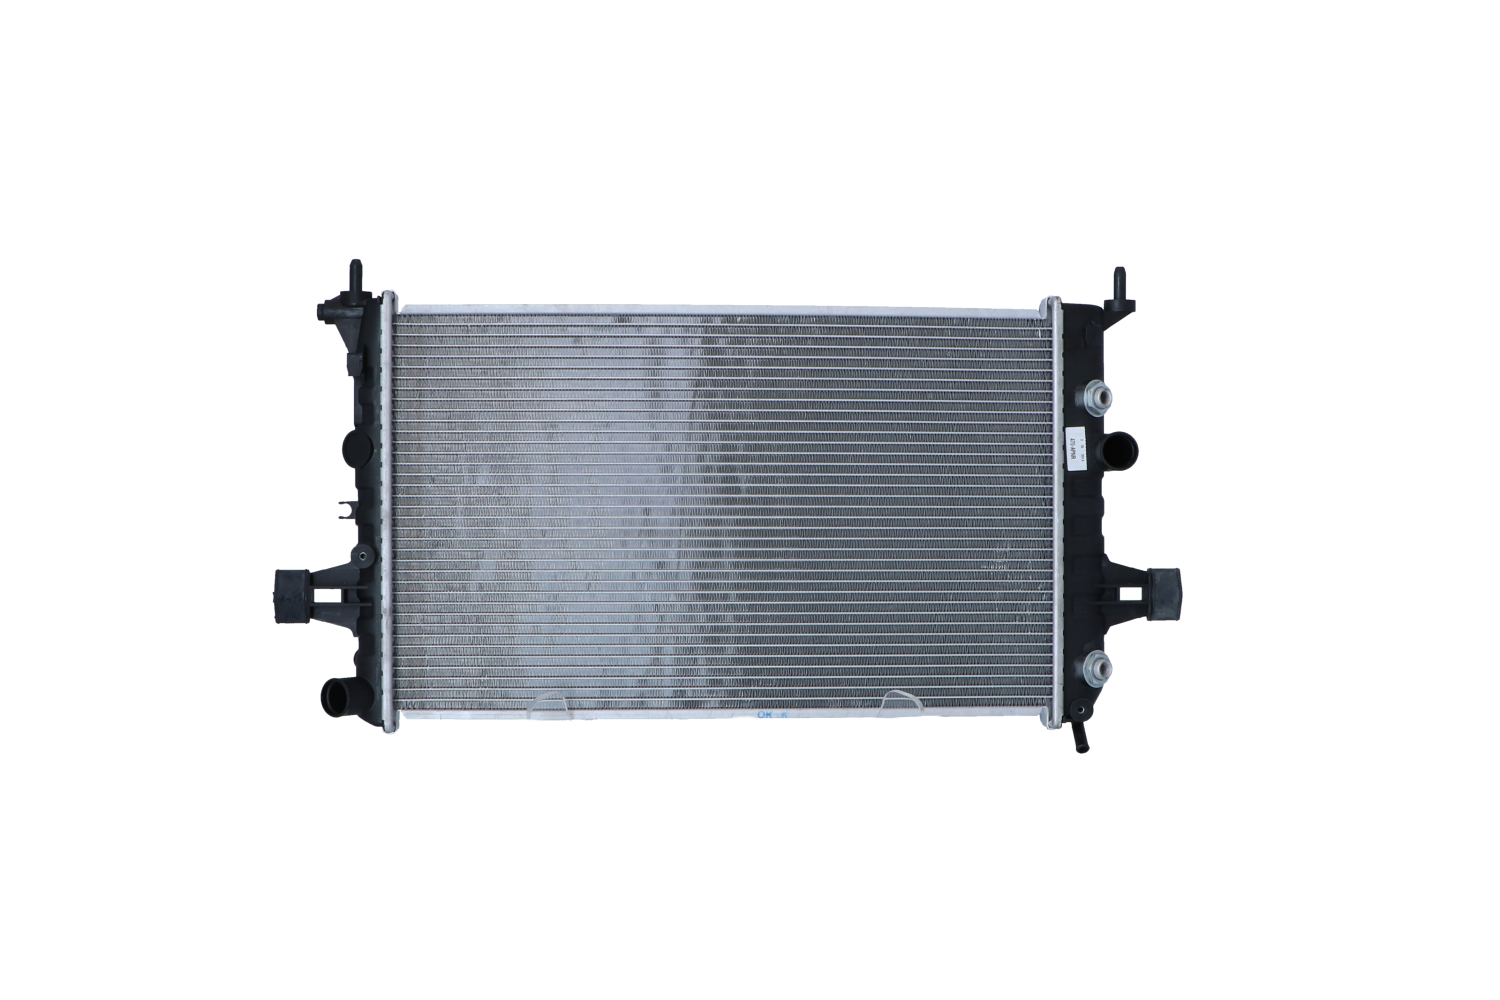 NRF EASY FIT 50562 Engine radiator Aluminium, 600 x 366 x 24 mm, with rubber grommet, Brazed cooling fins